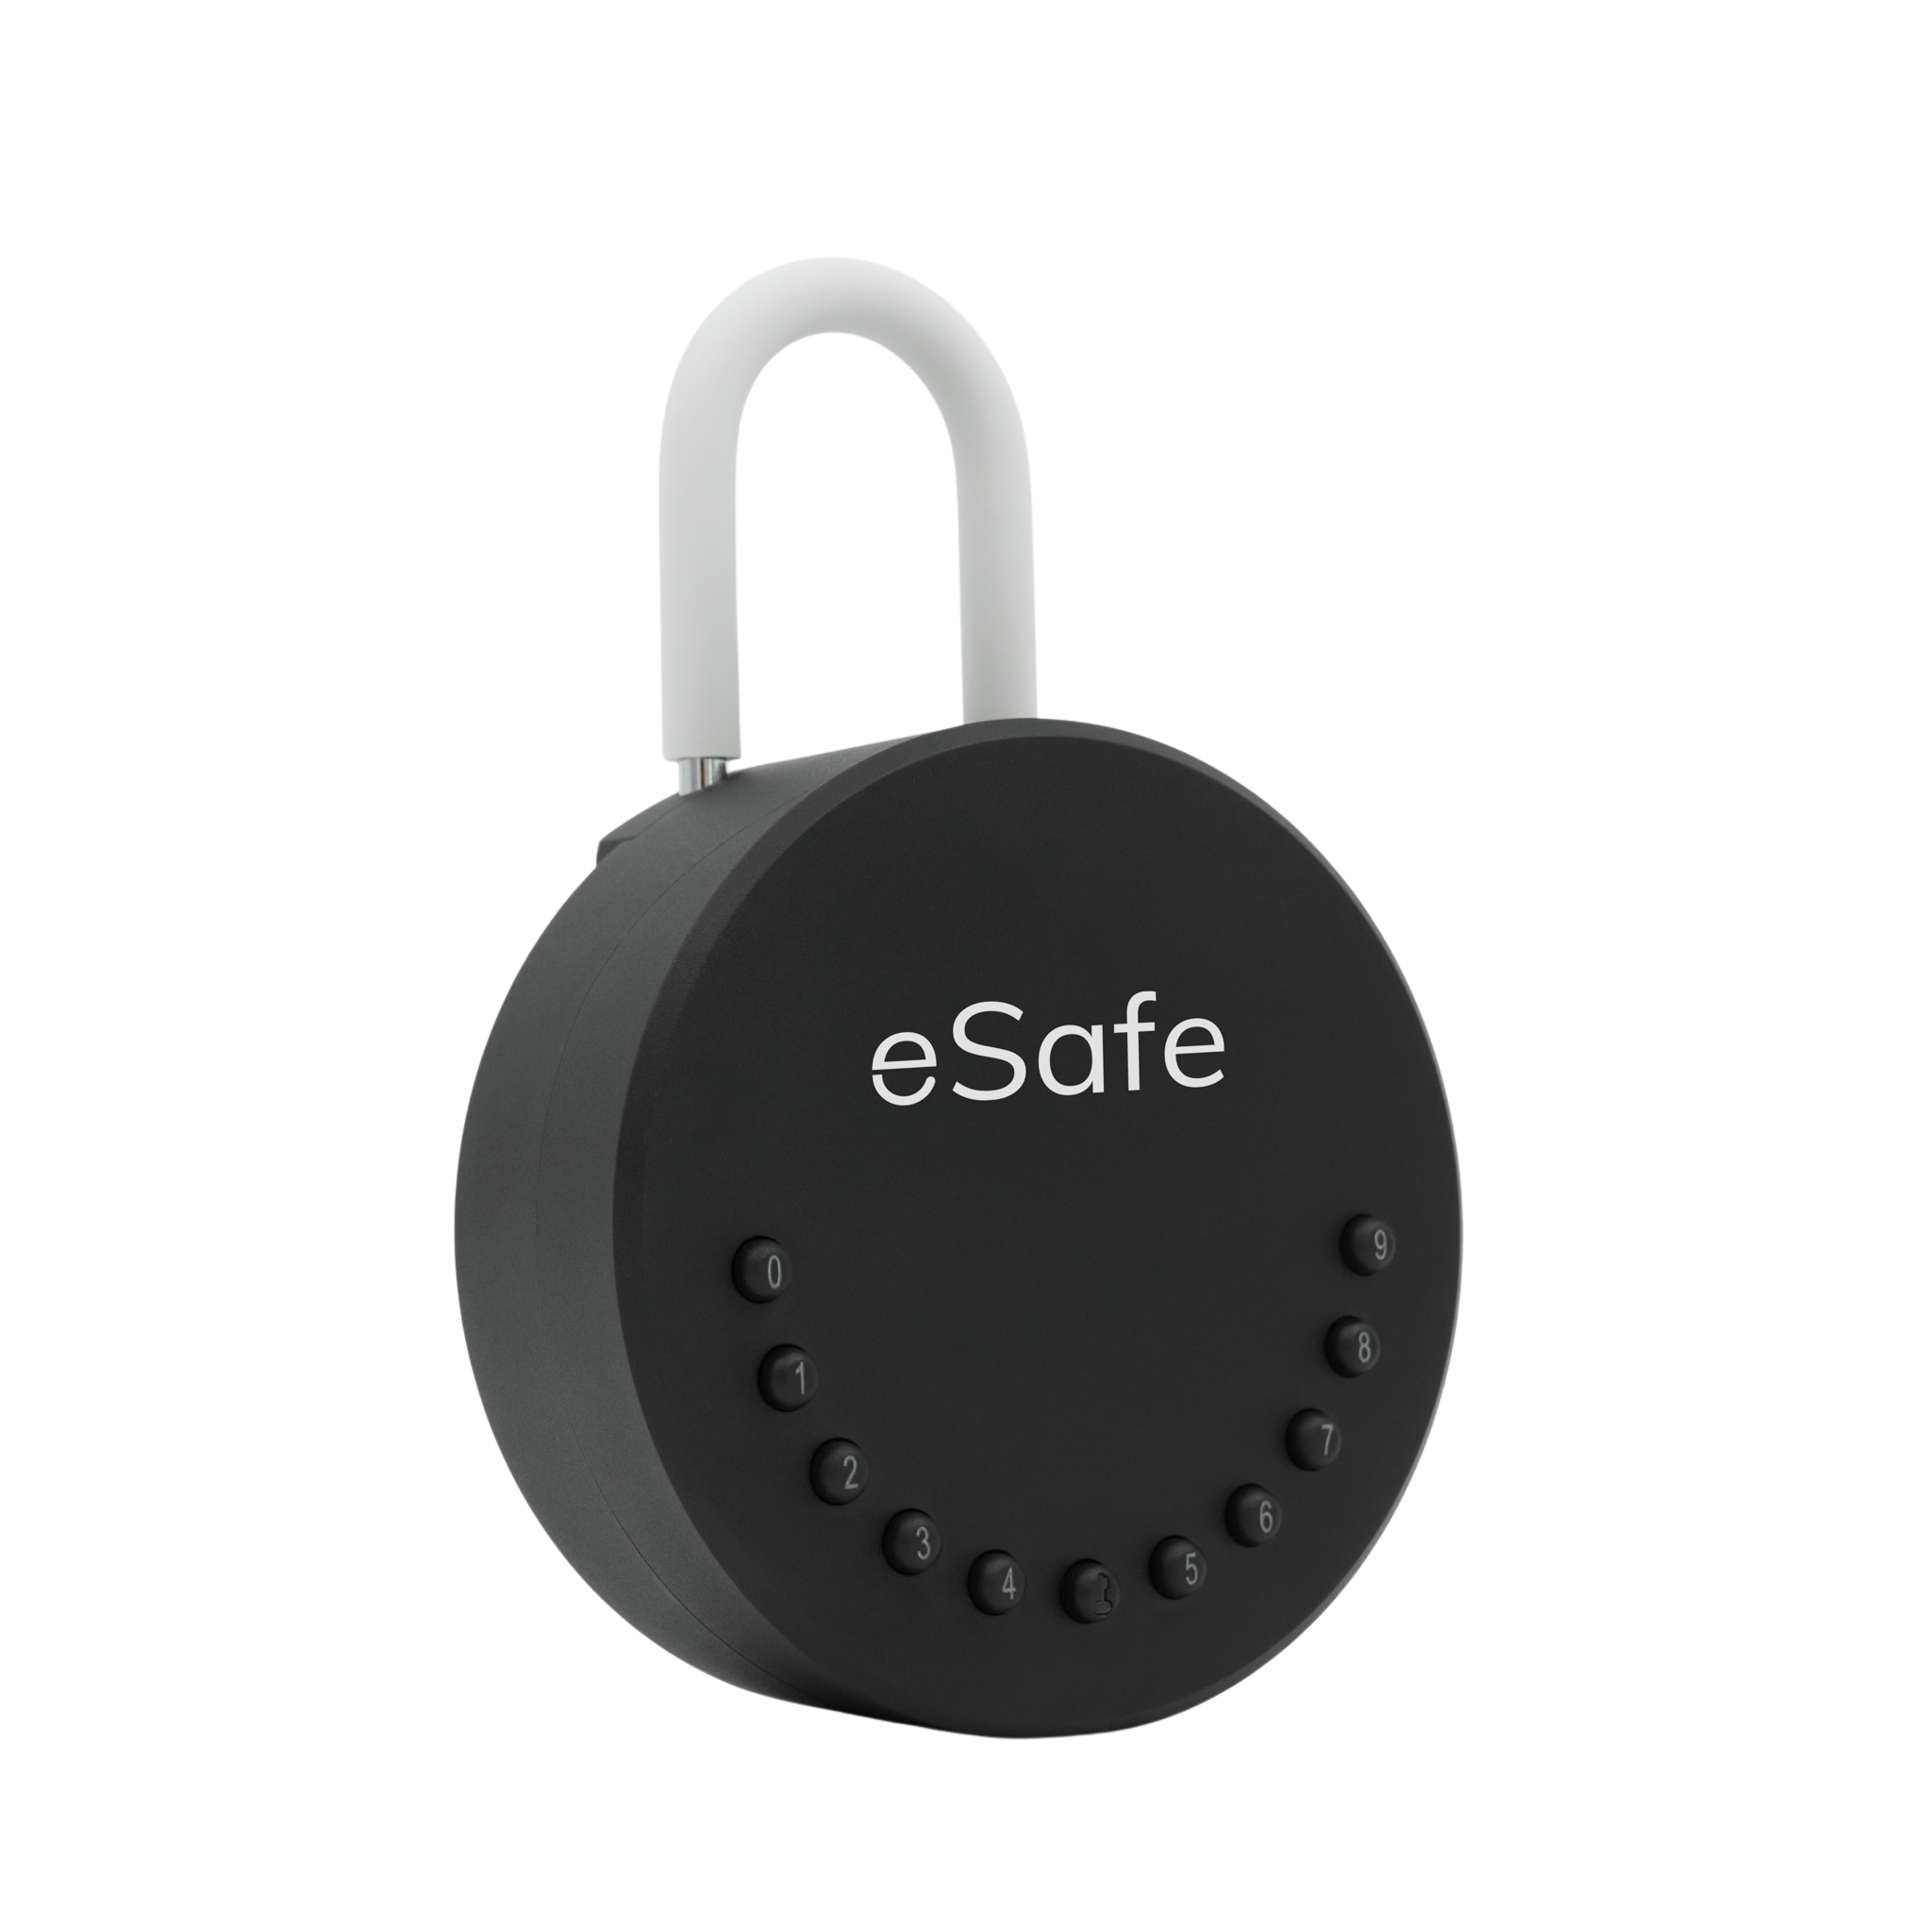 eSafe key box with shackle attached on white background